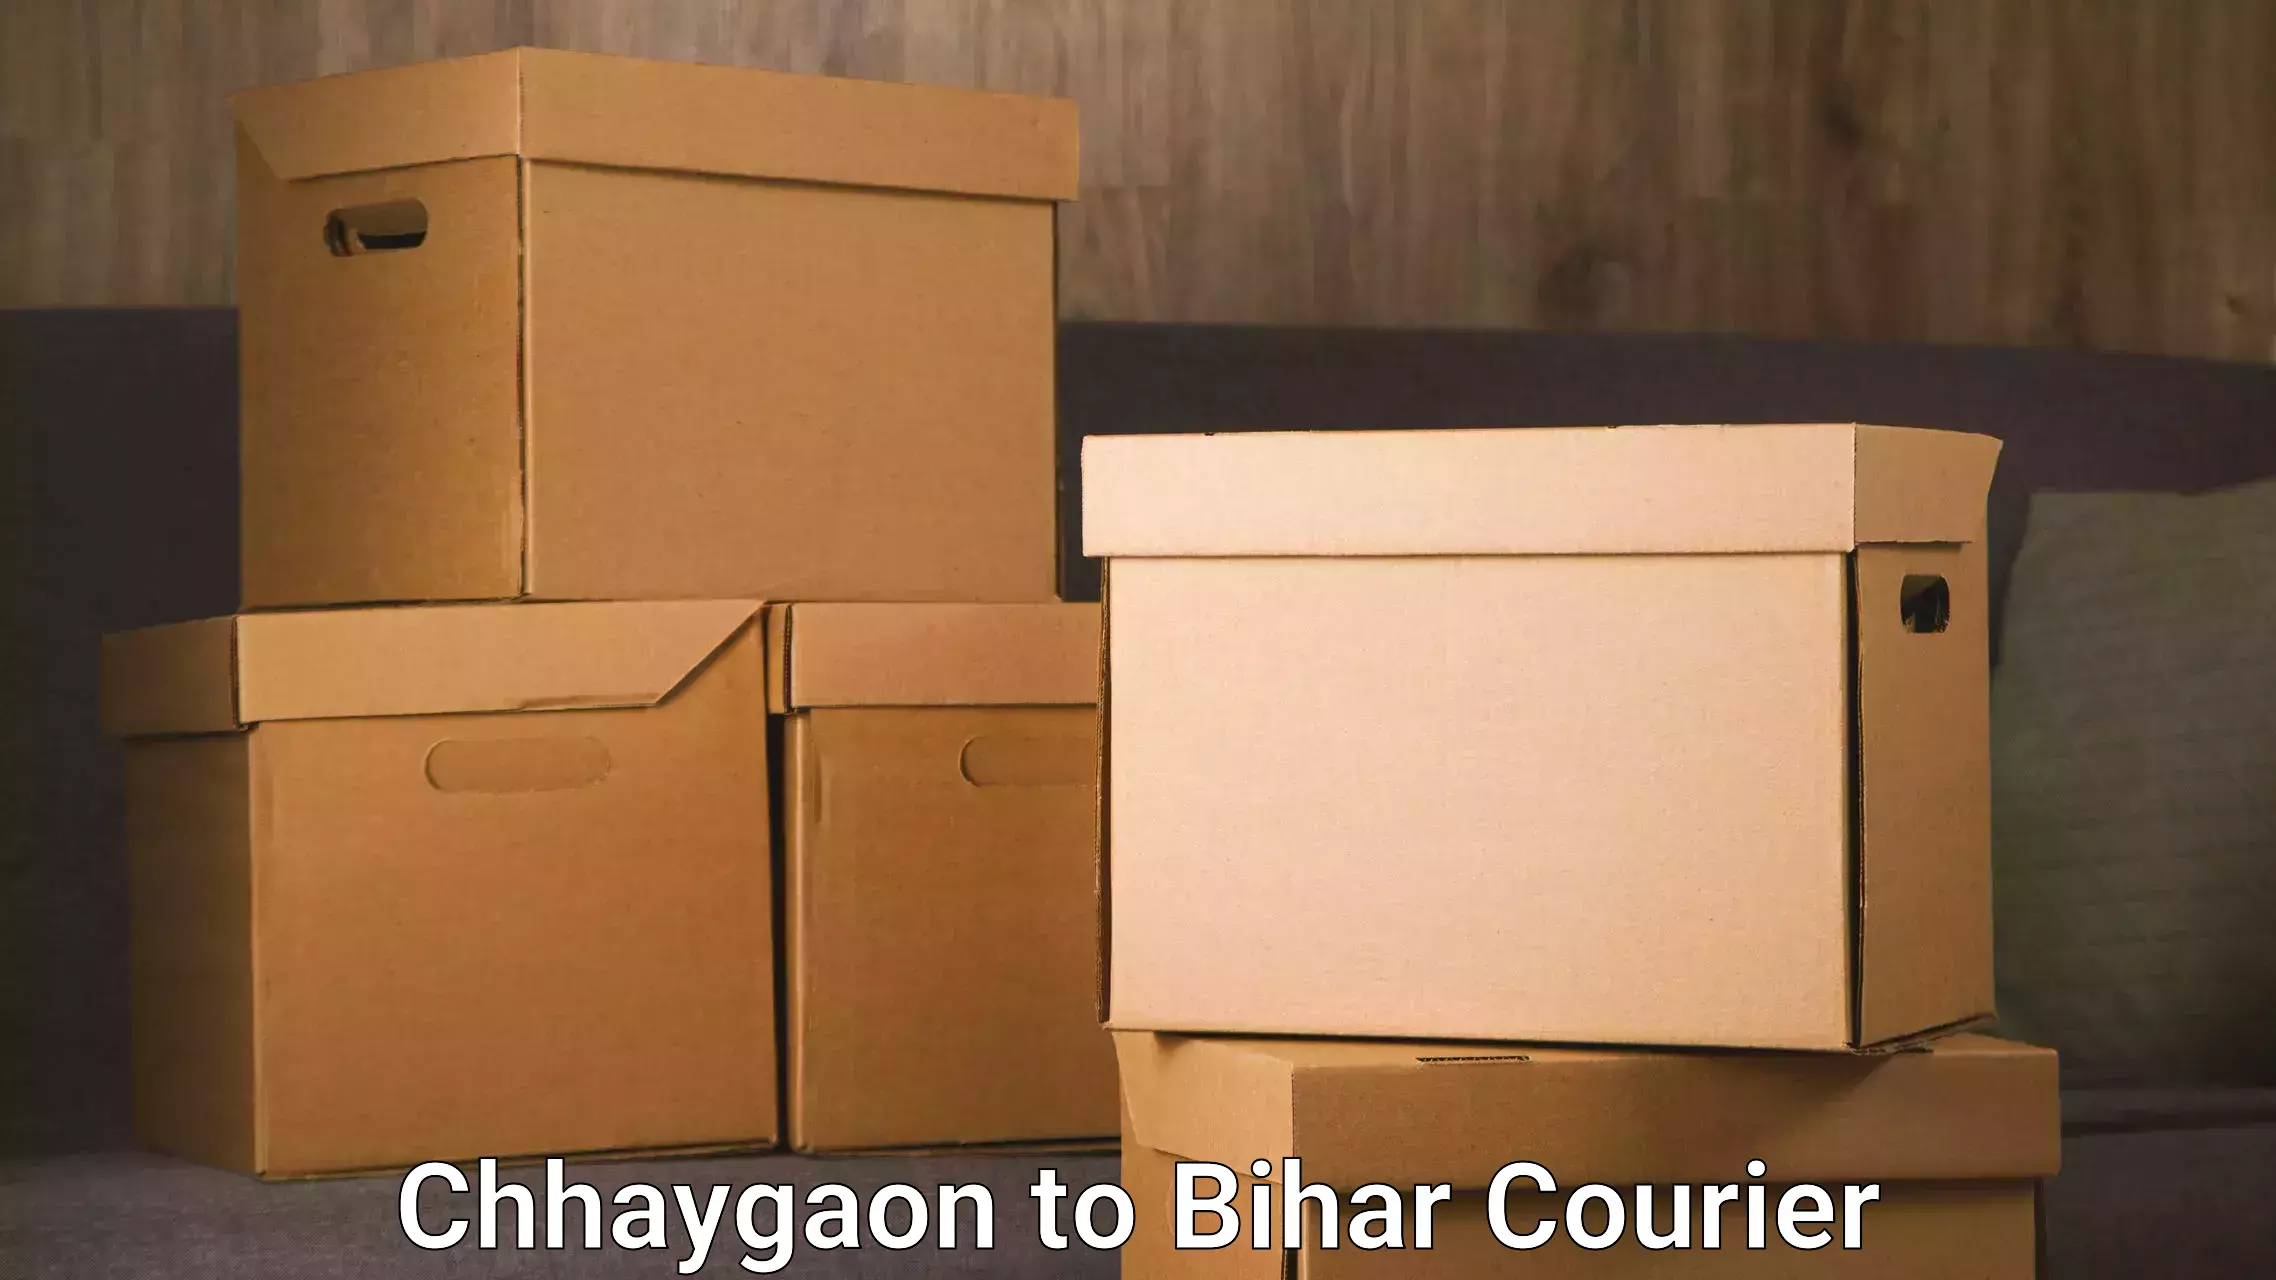 Package delivery network Chhaygaon to Jehanabad